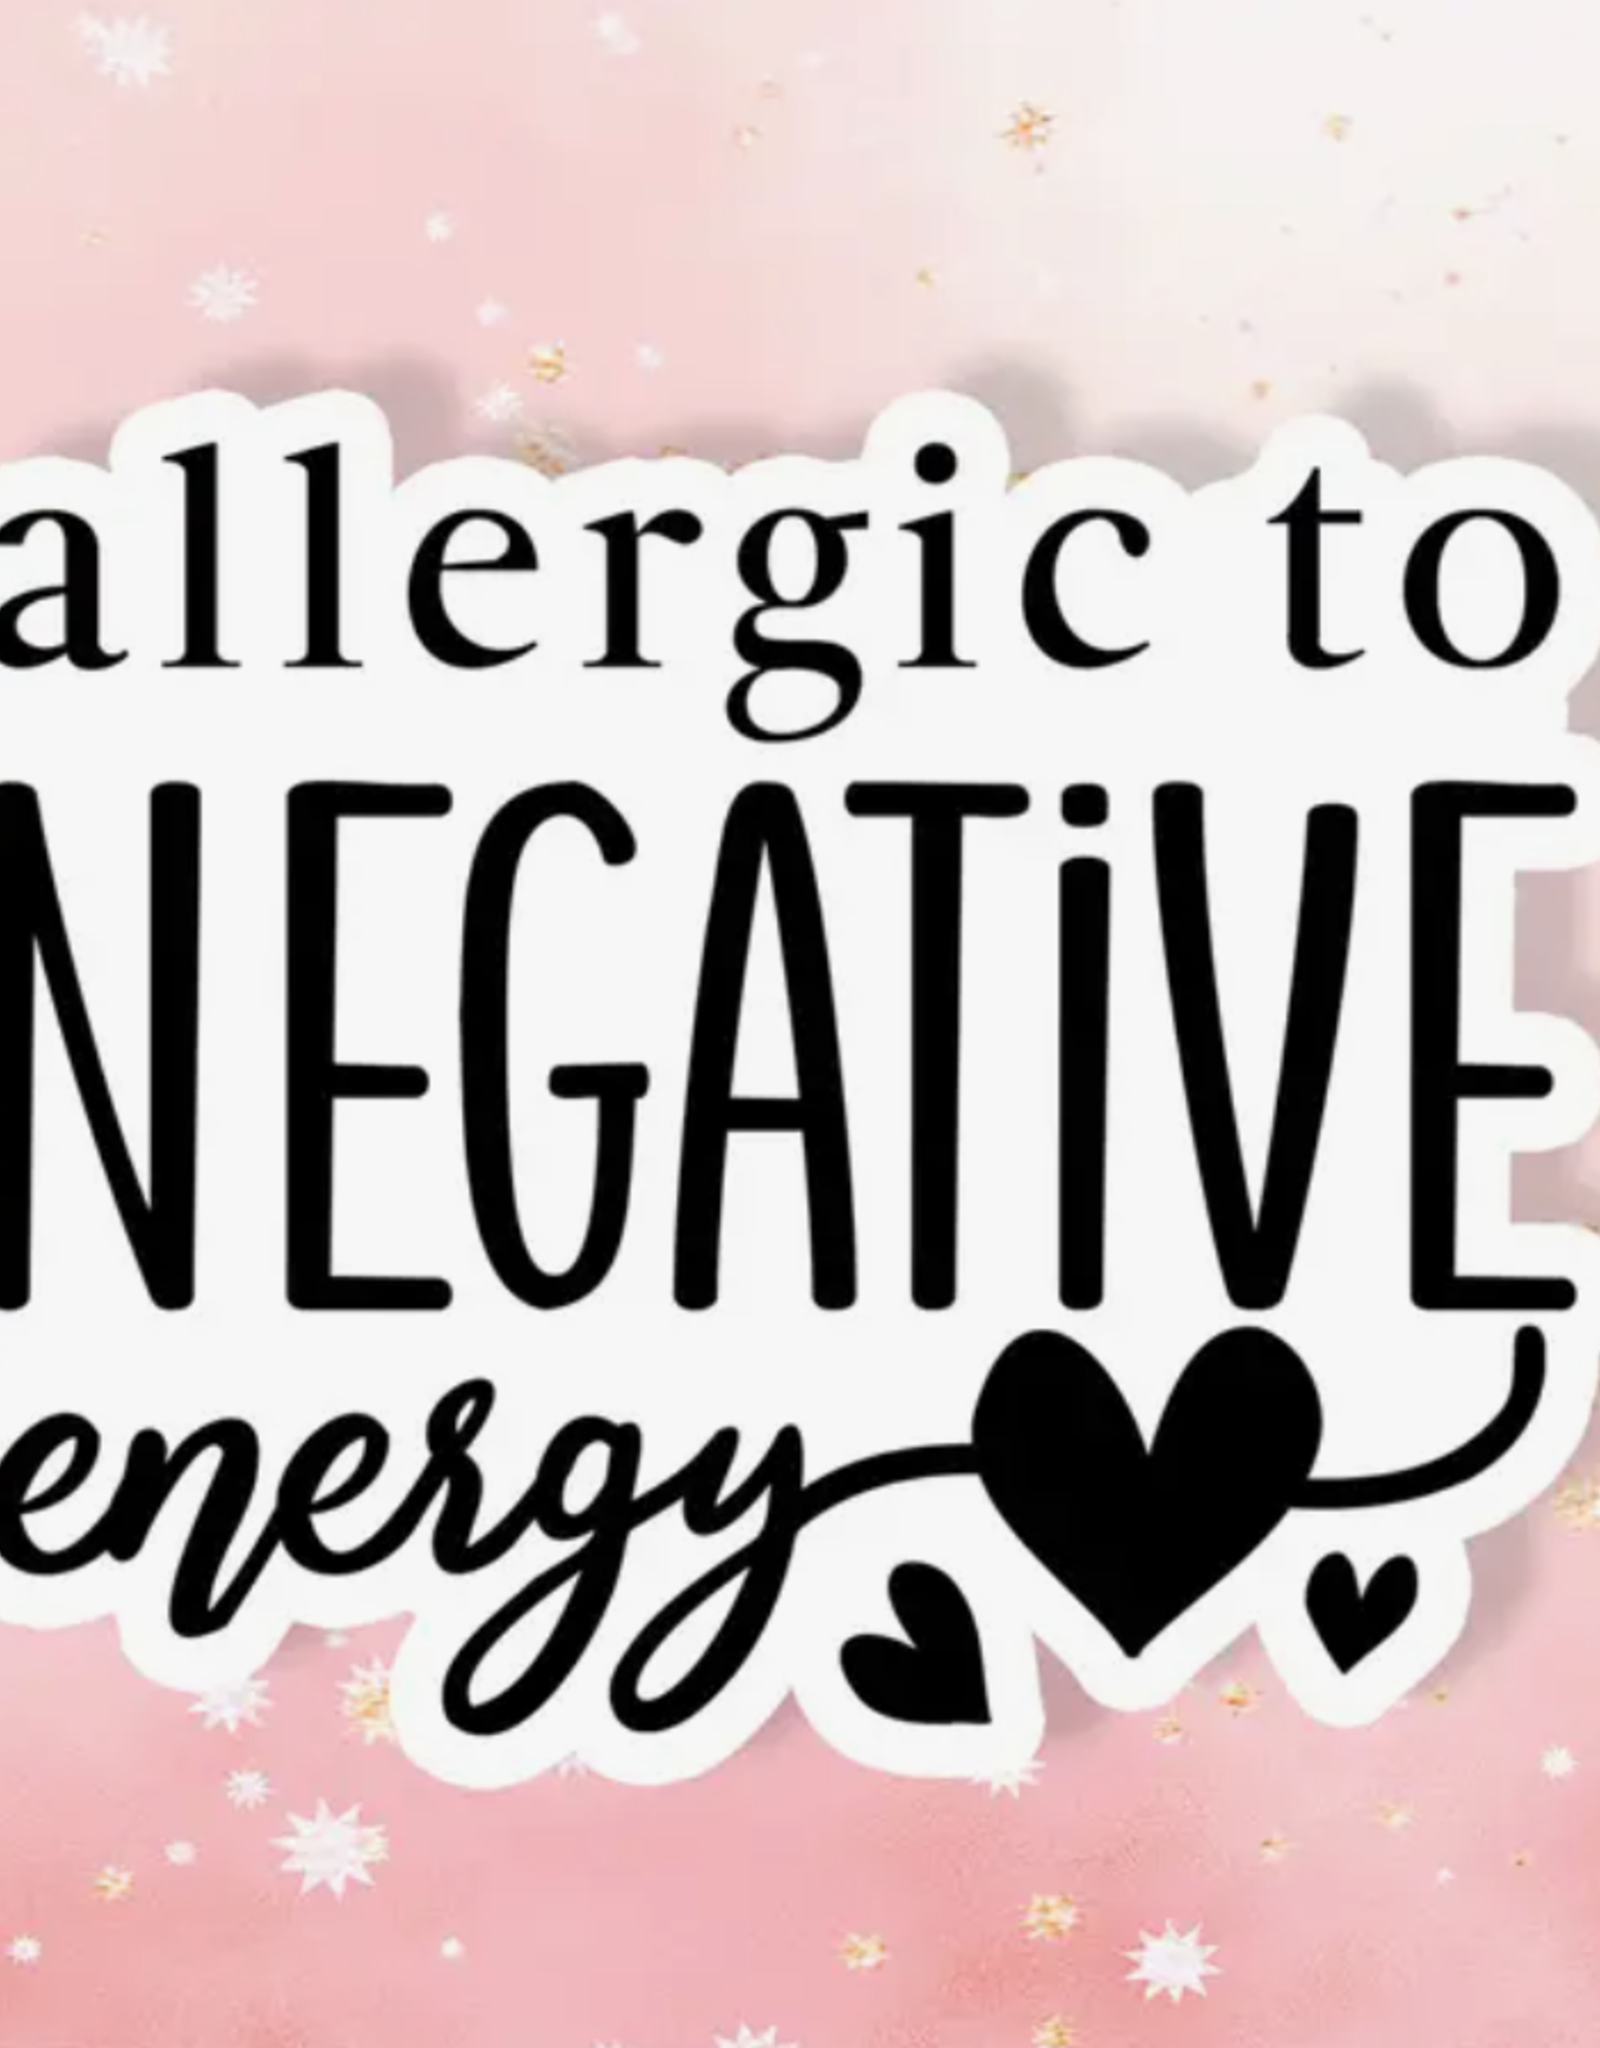 Allergic to Negative Energy Sticker Metaphysical Intention